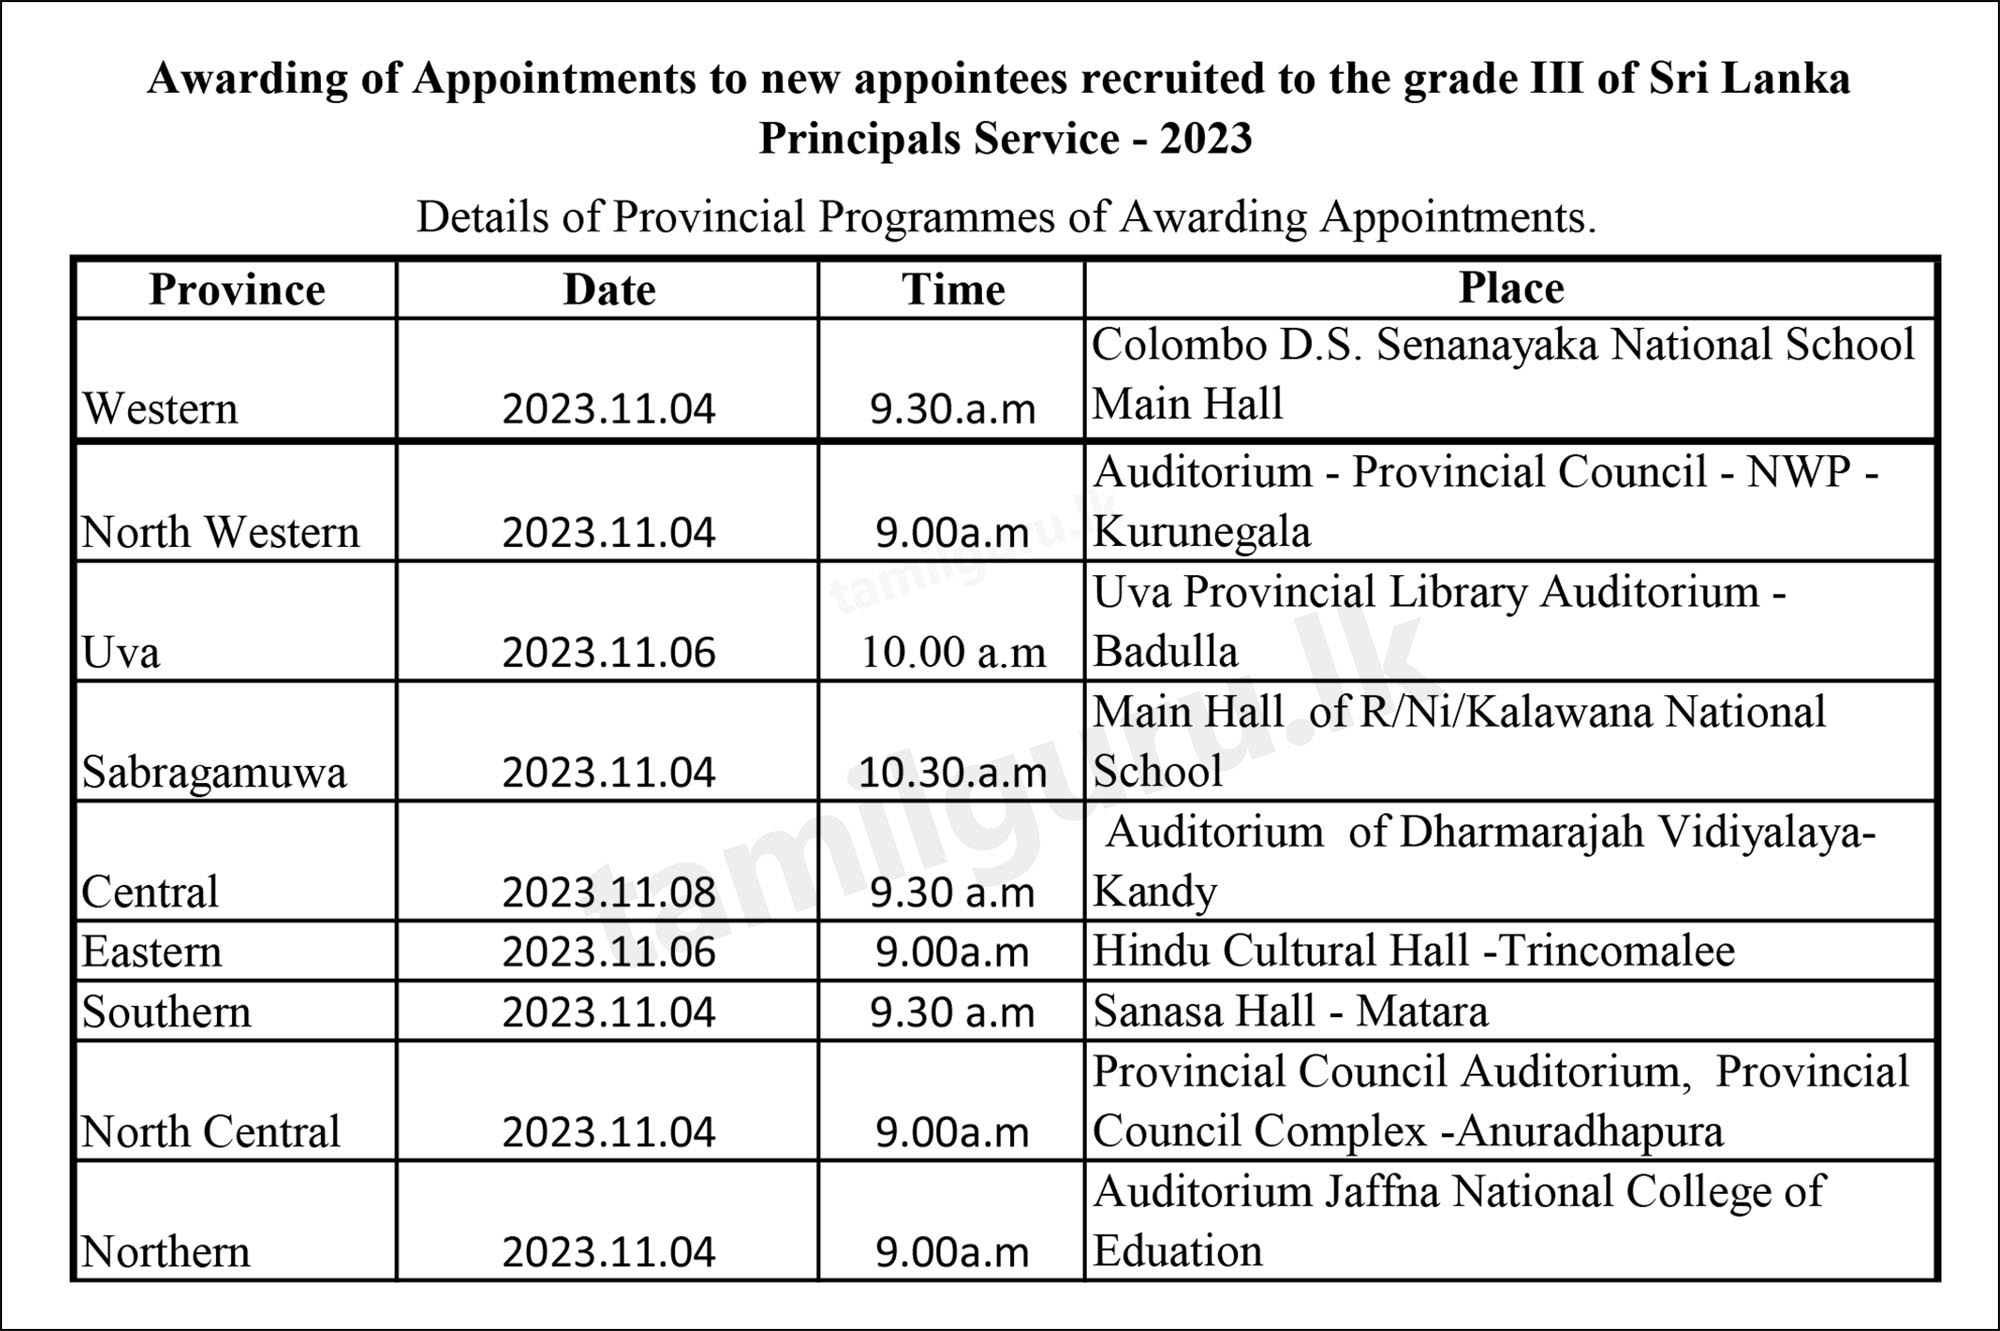 Sri Lanka Principals' Service (SLPS) Awarding Appointments 2023 (Date, Time & Place)